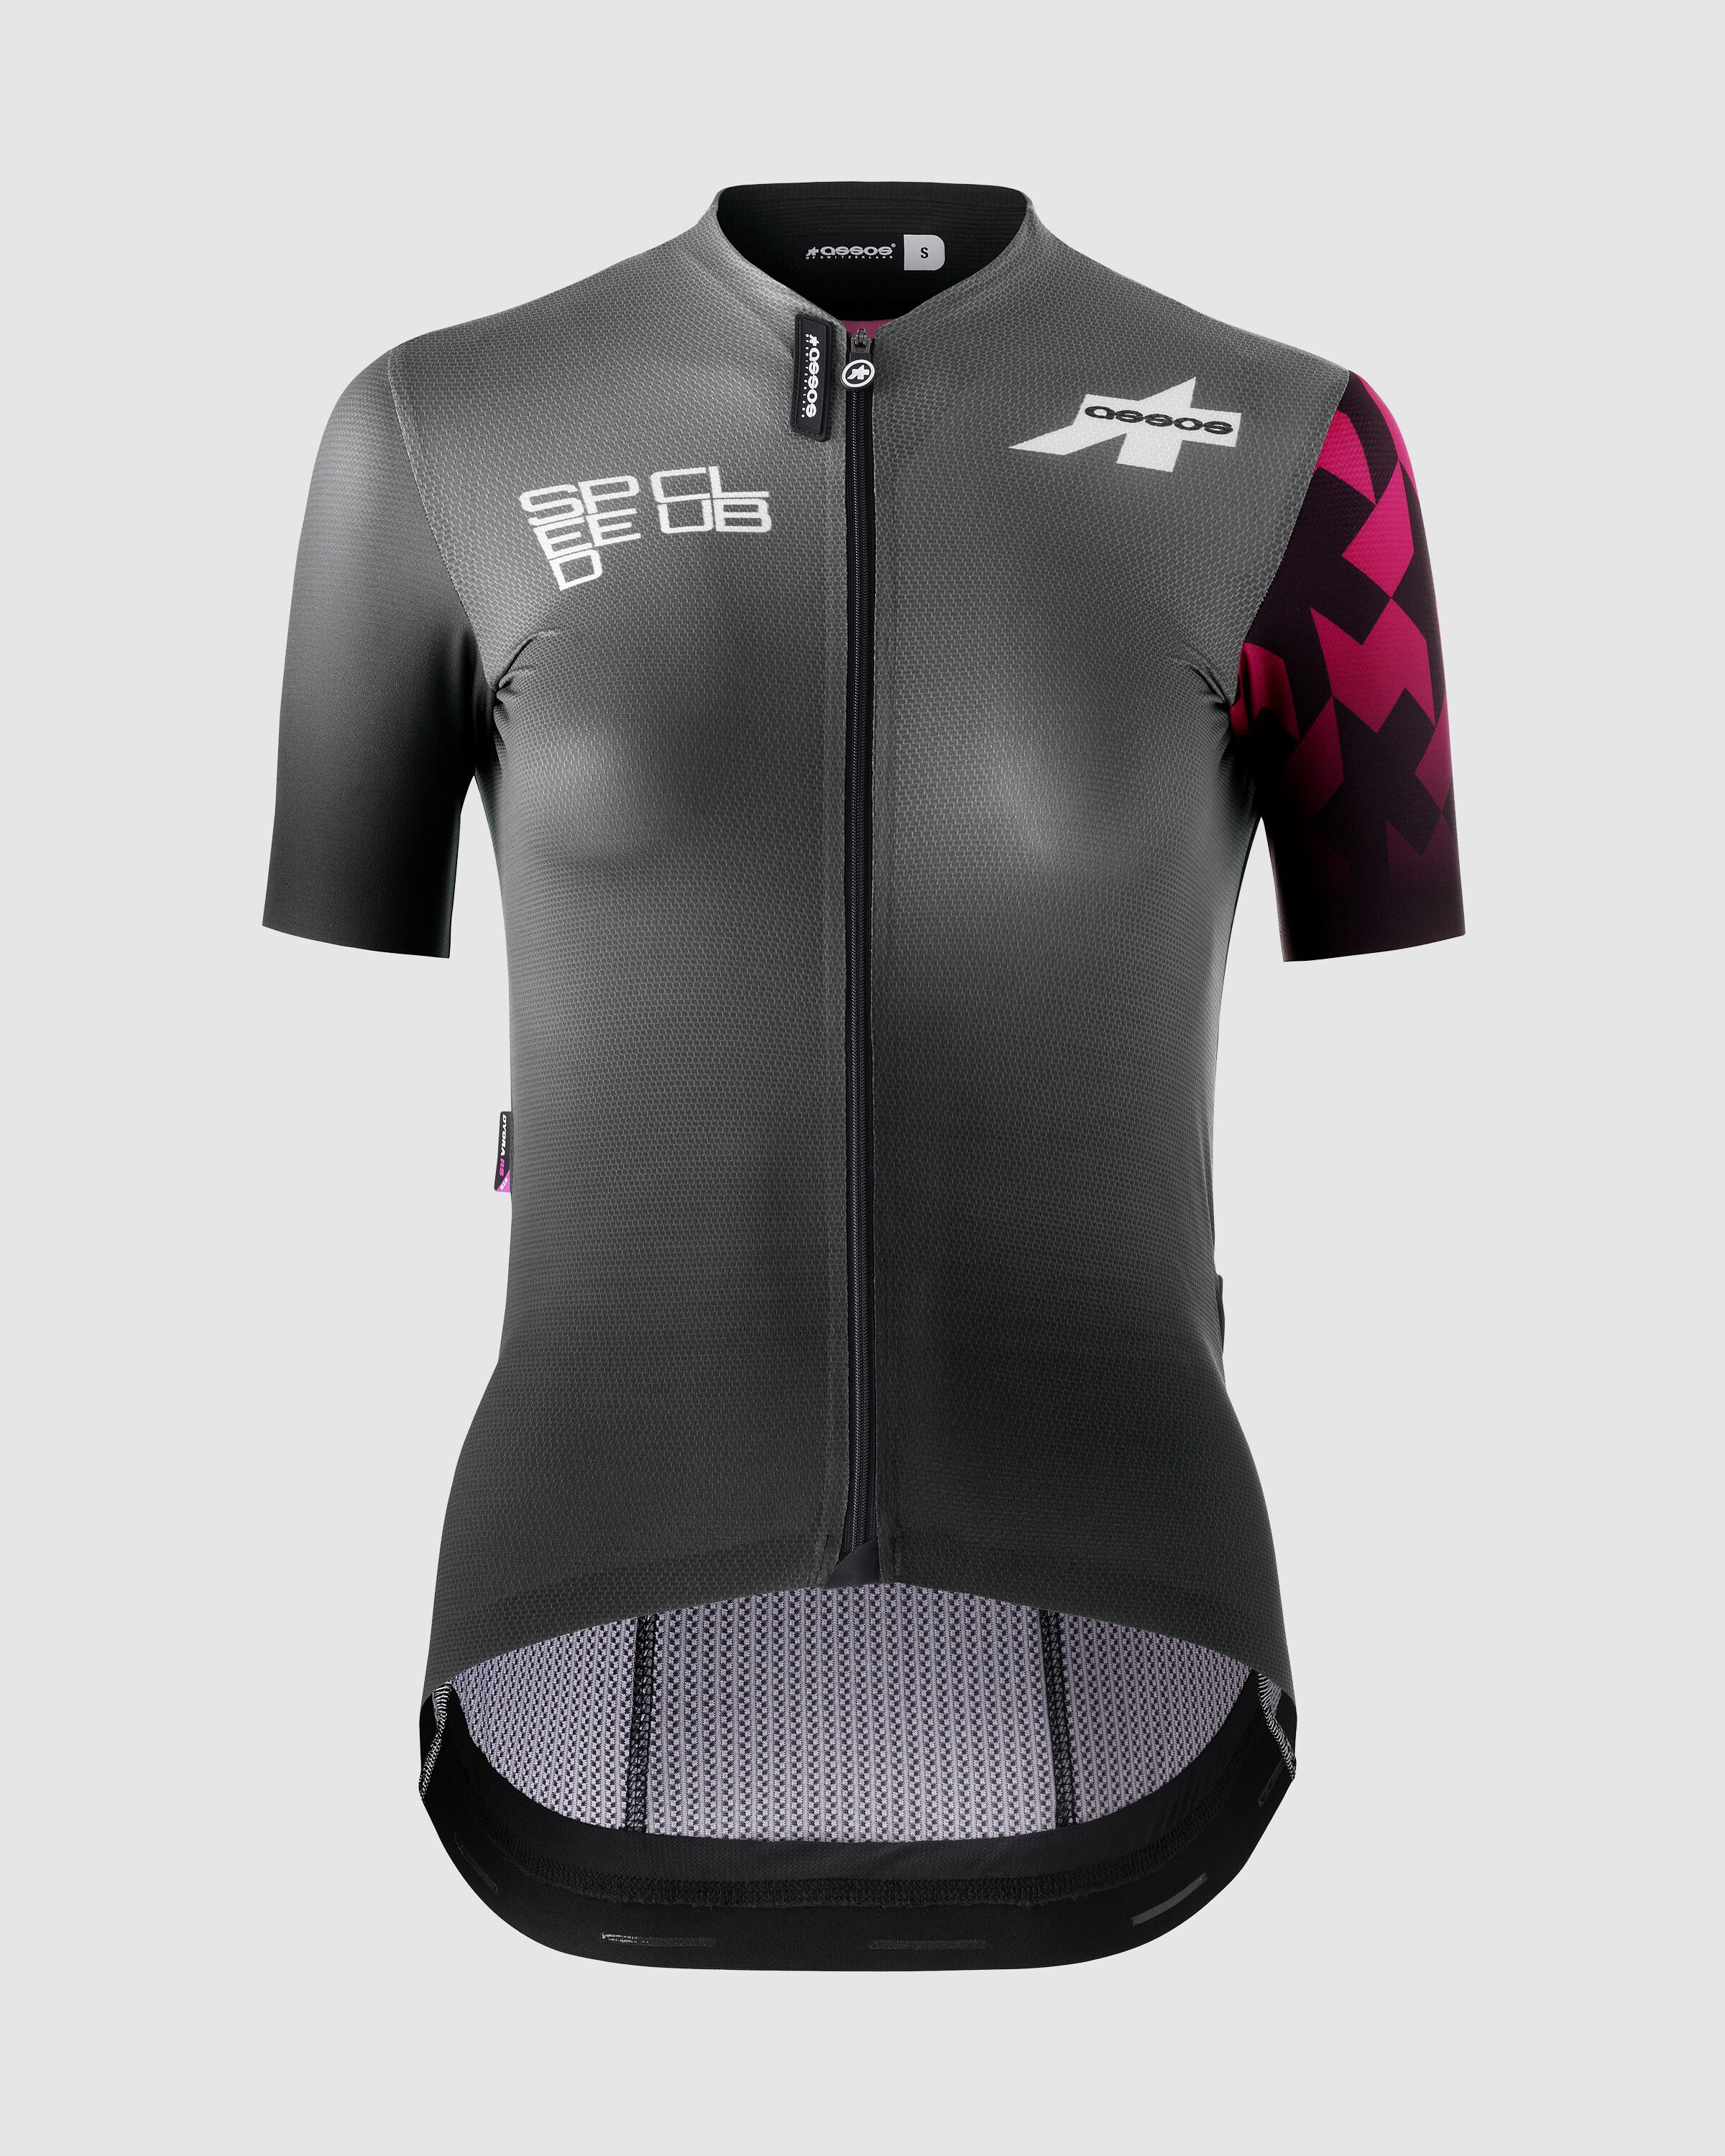 DYORA RS JERSEY S9 – SPEED CLUB 2022 - ASSOS Of Switzerland - Official Outlet